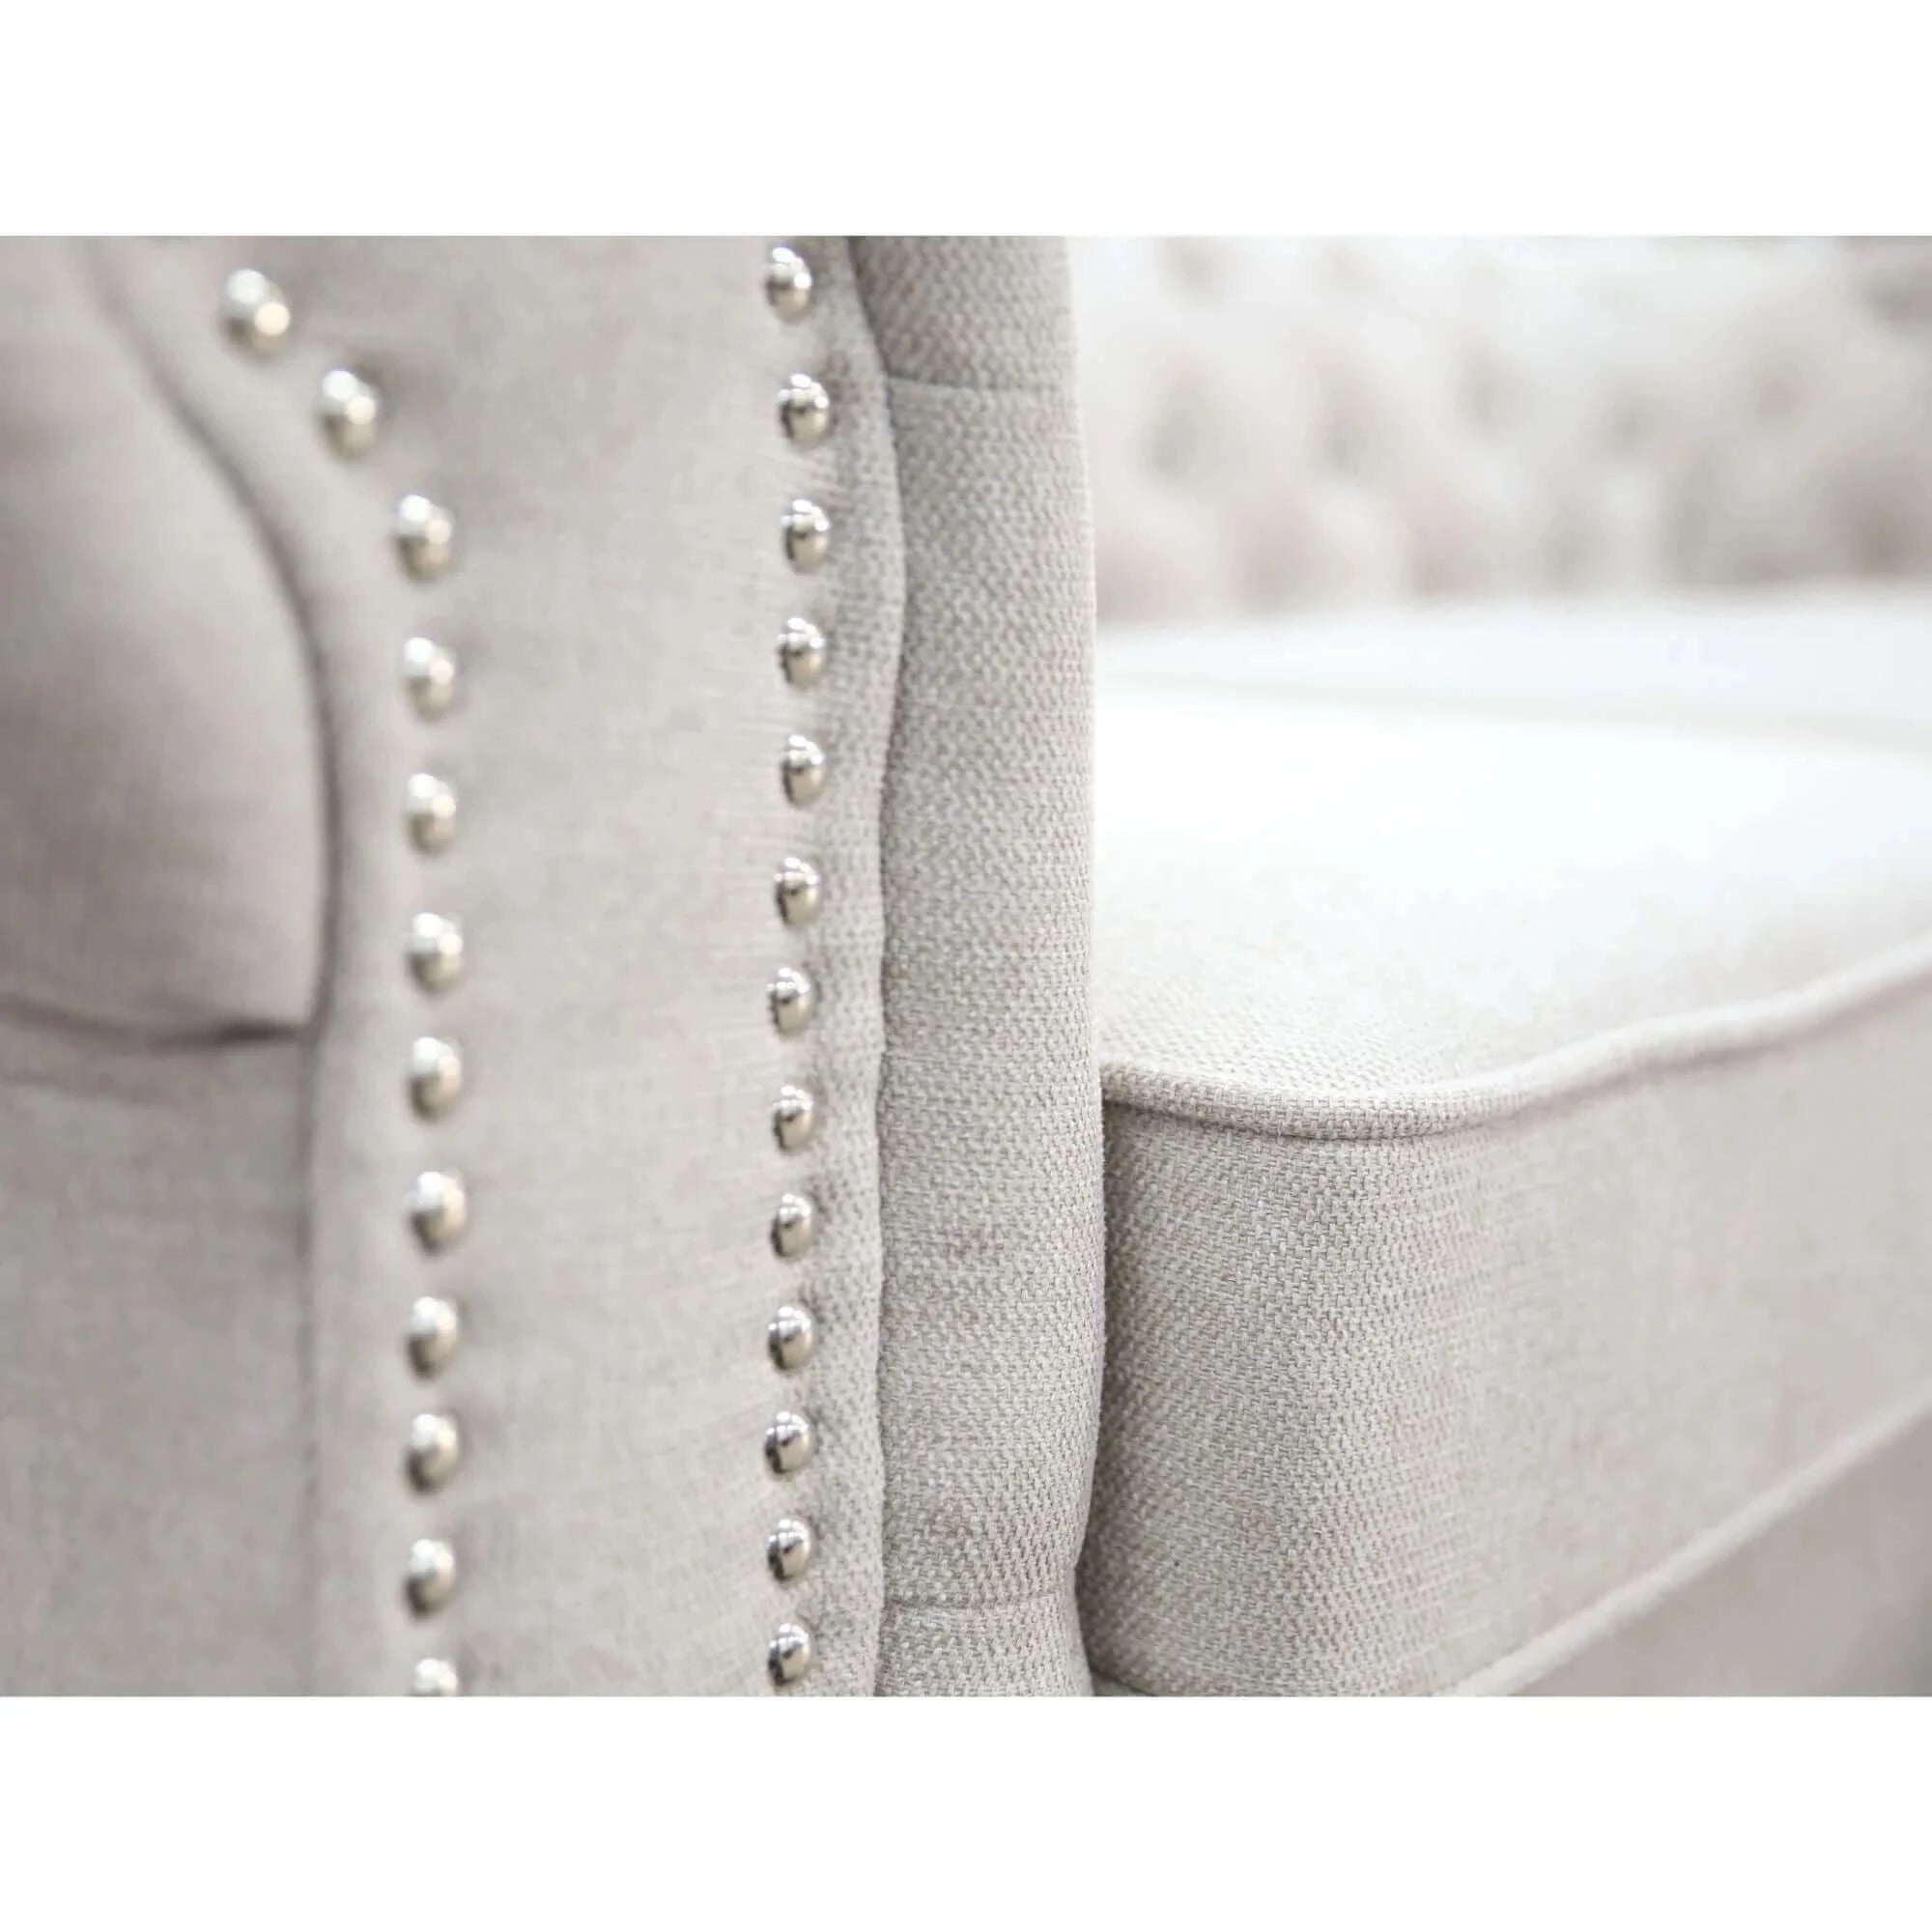 Buy mellowly 3 seater sofa fabric uplholstered chesterfield lounge couch - beige - upinteriors-Upinteriors